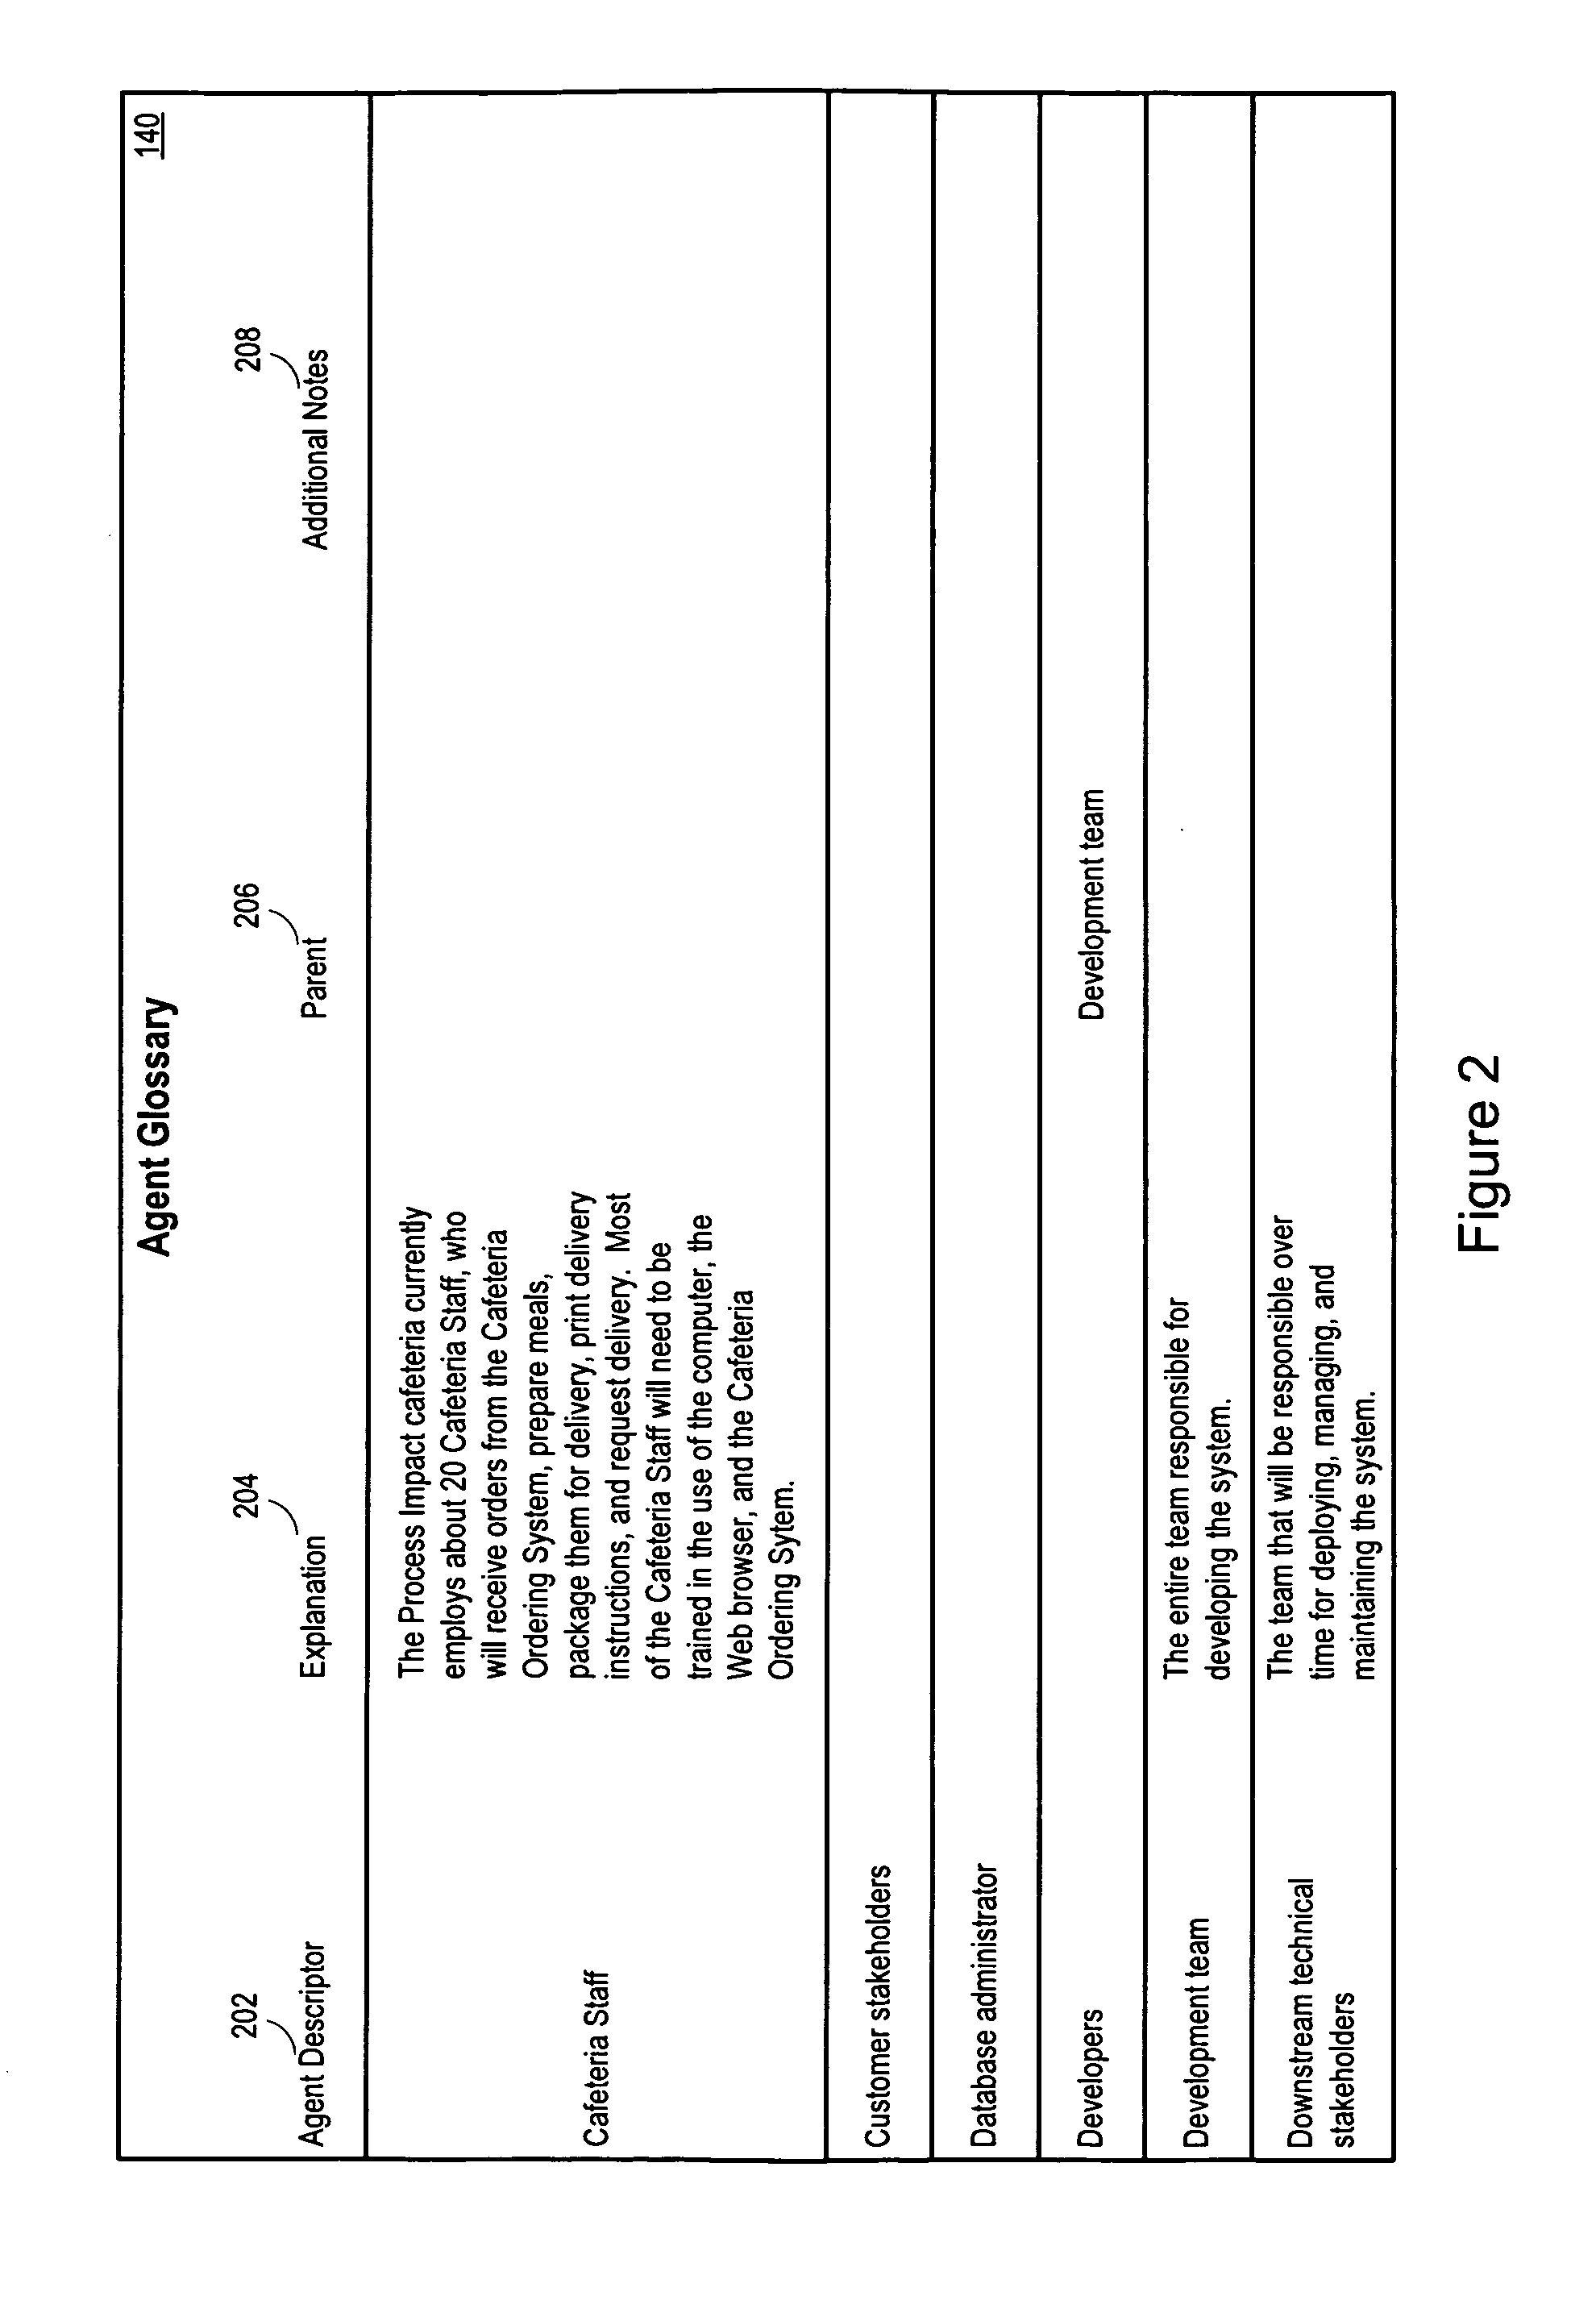 Document Analysis, Commenting, and Reporting System